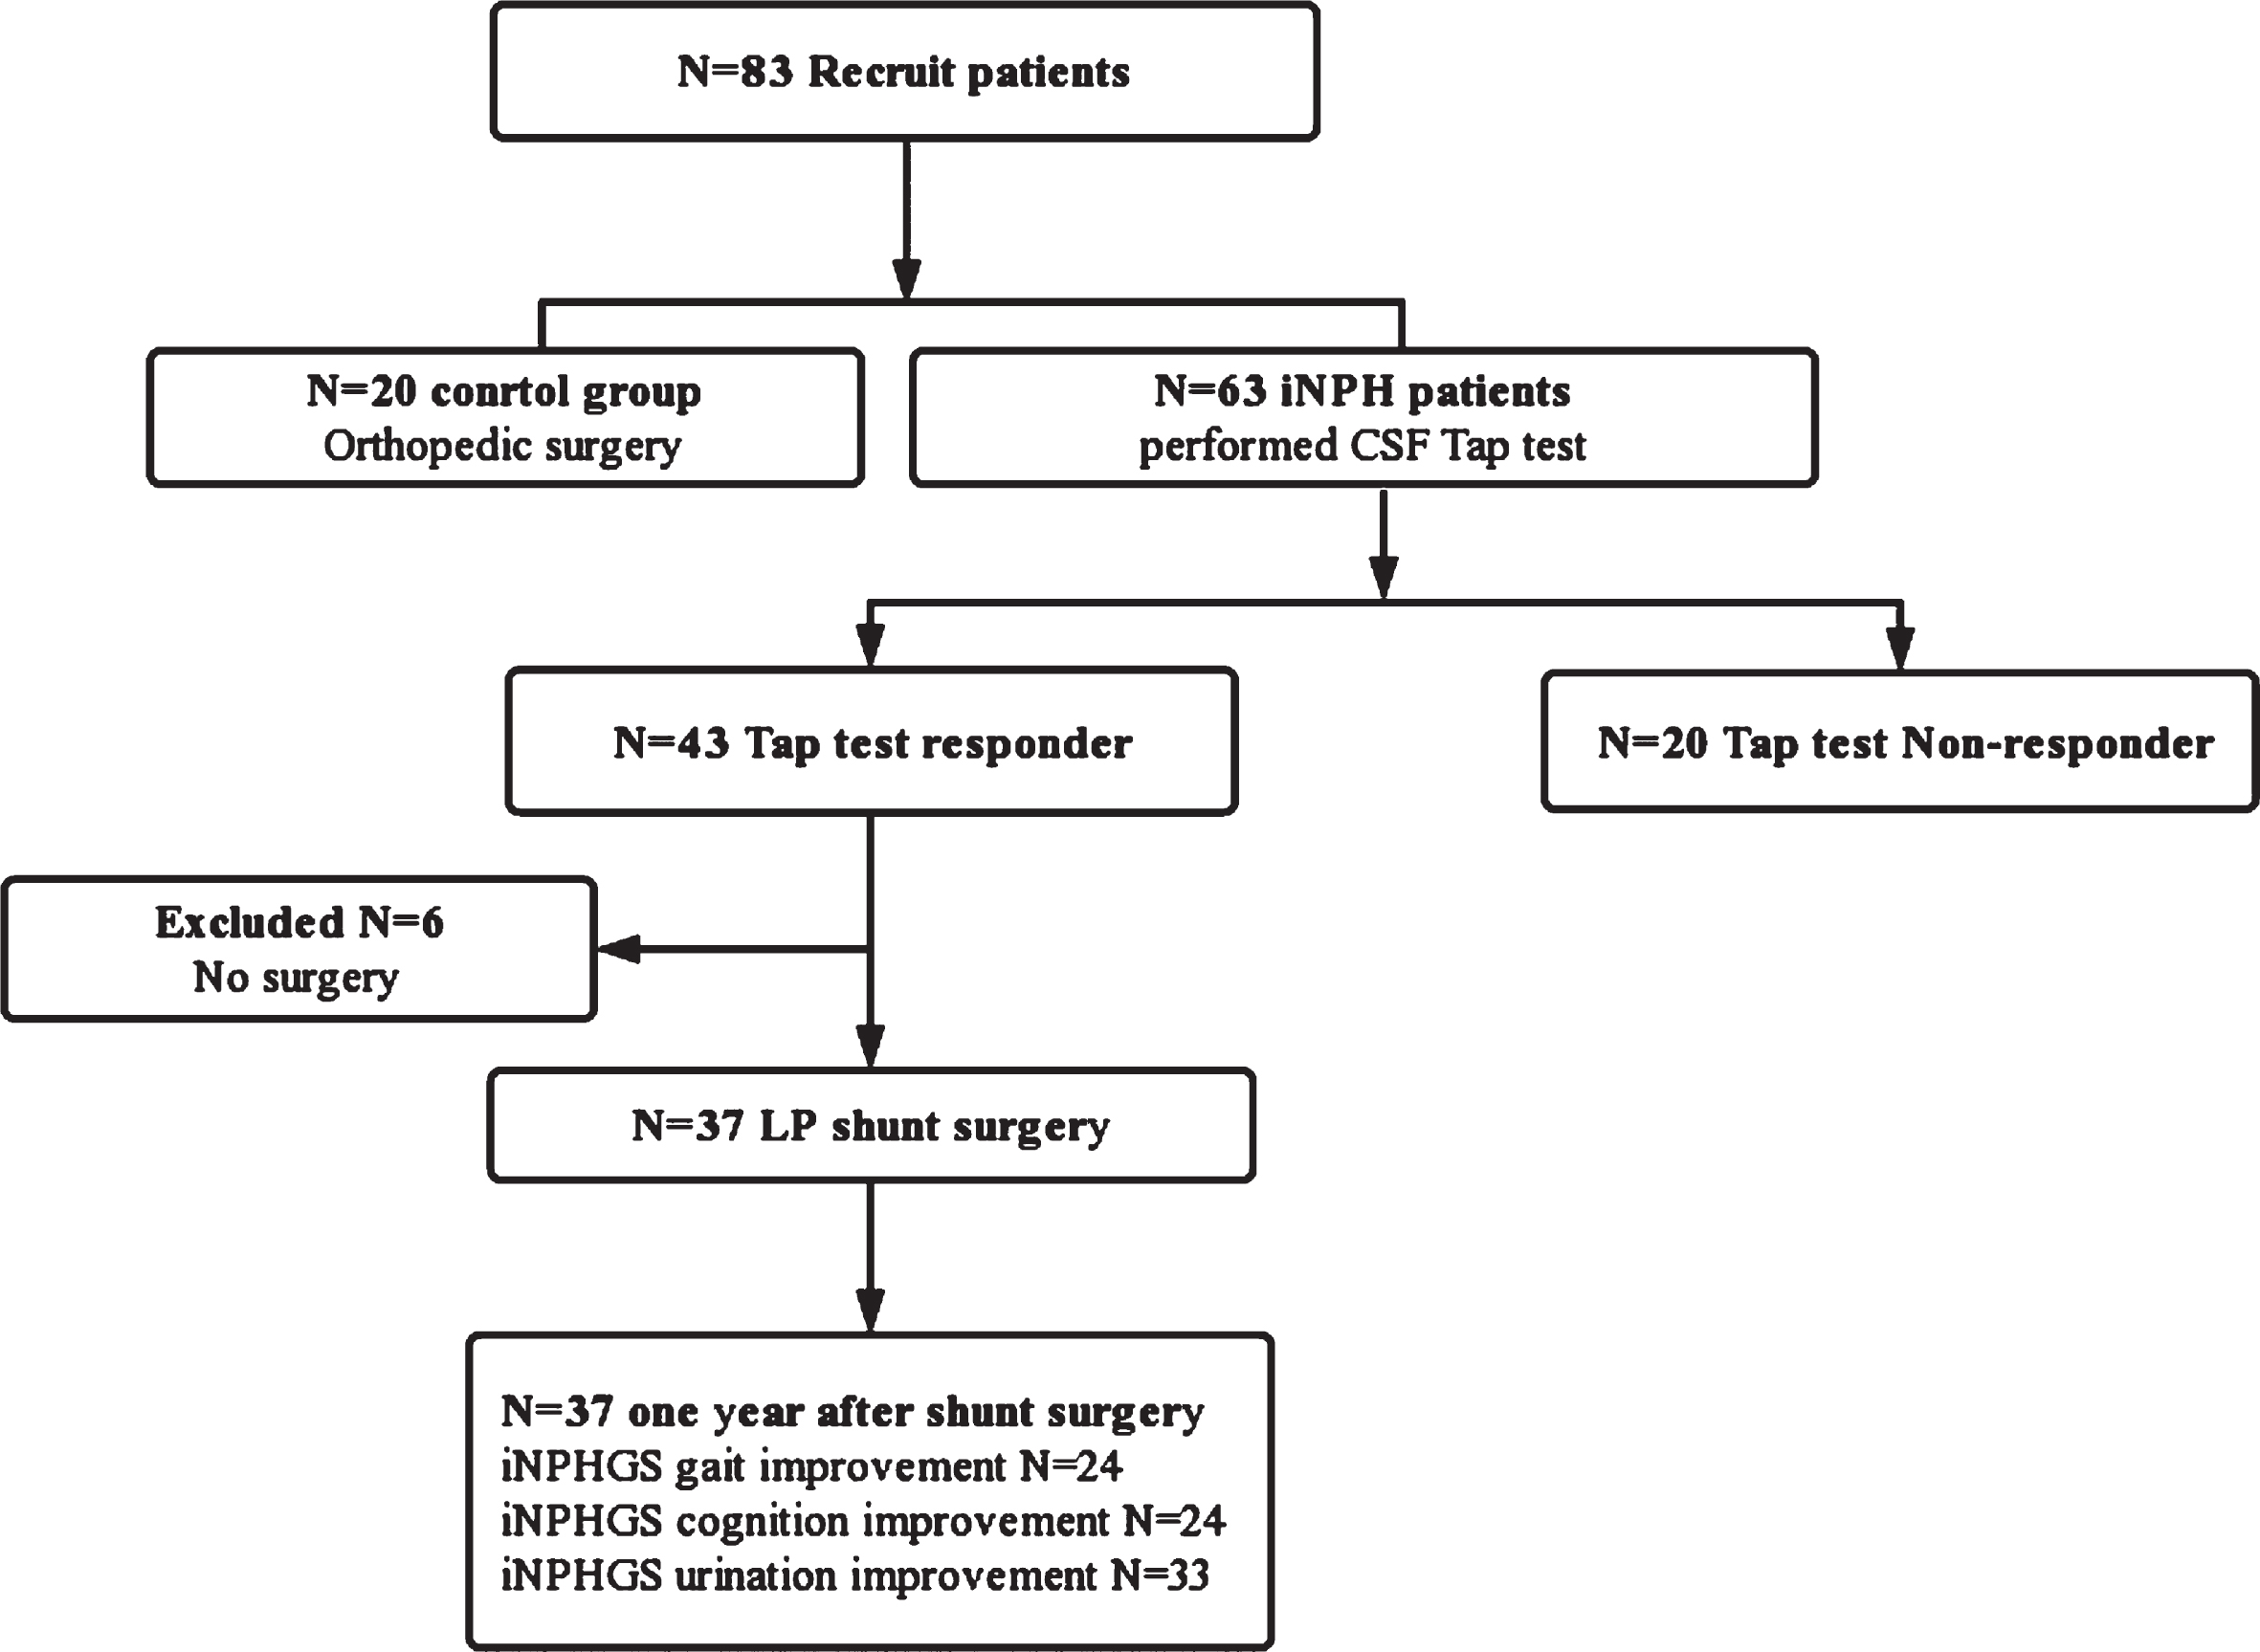 Patient selection flowchart. Sixty-three patients with suspected idiopathic normal pressure hydrocephalus (iNPH) and twenty control patients who underwent orthopedic surgery were included in the study.